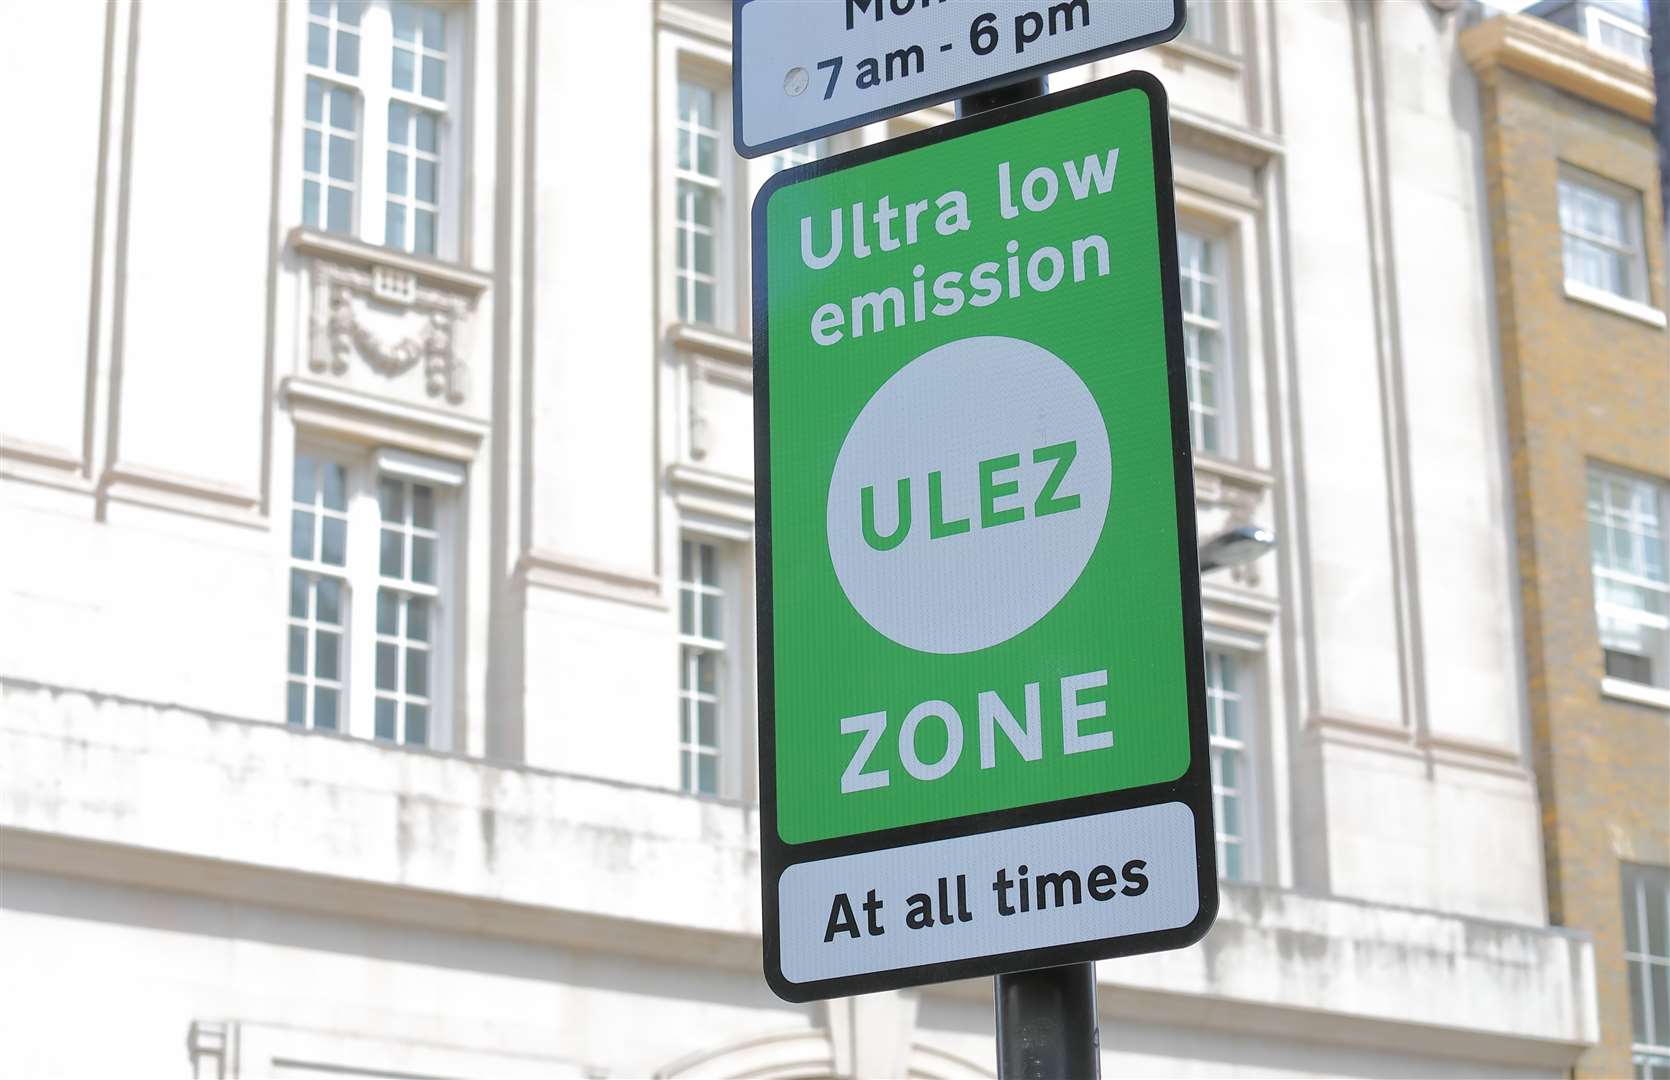 Ultra Low Emission Zones are needed in many Kent towns, says one reader. Picture: iStock